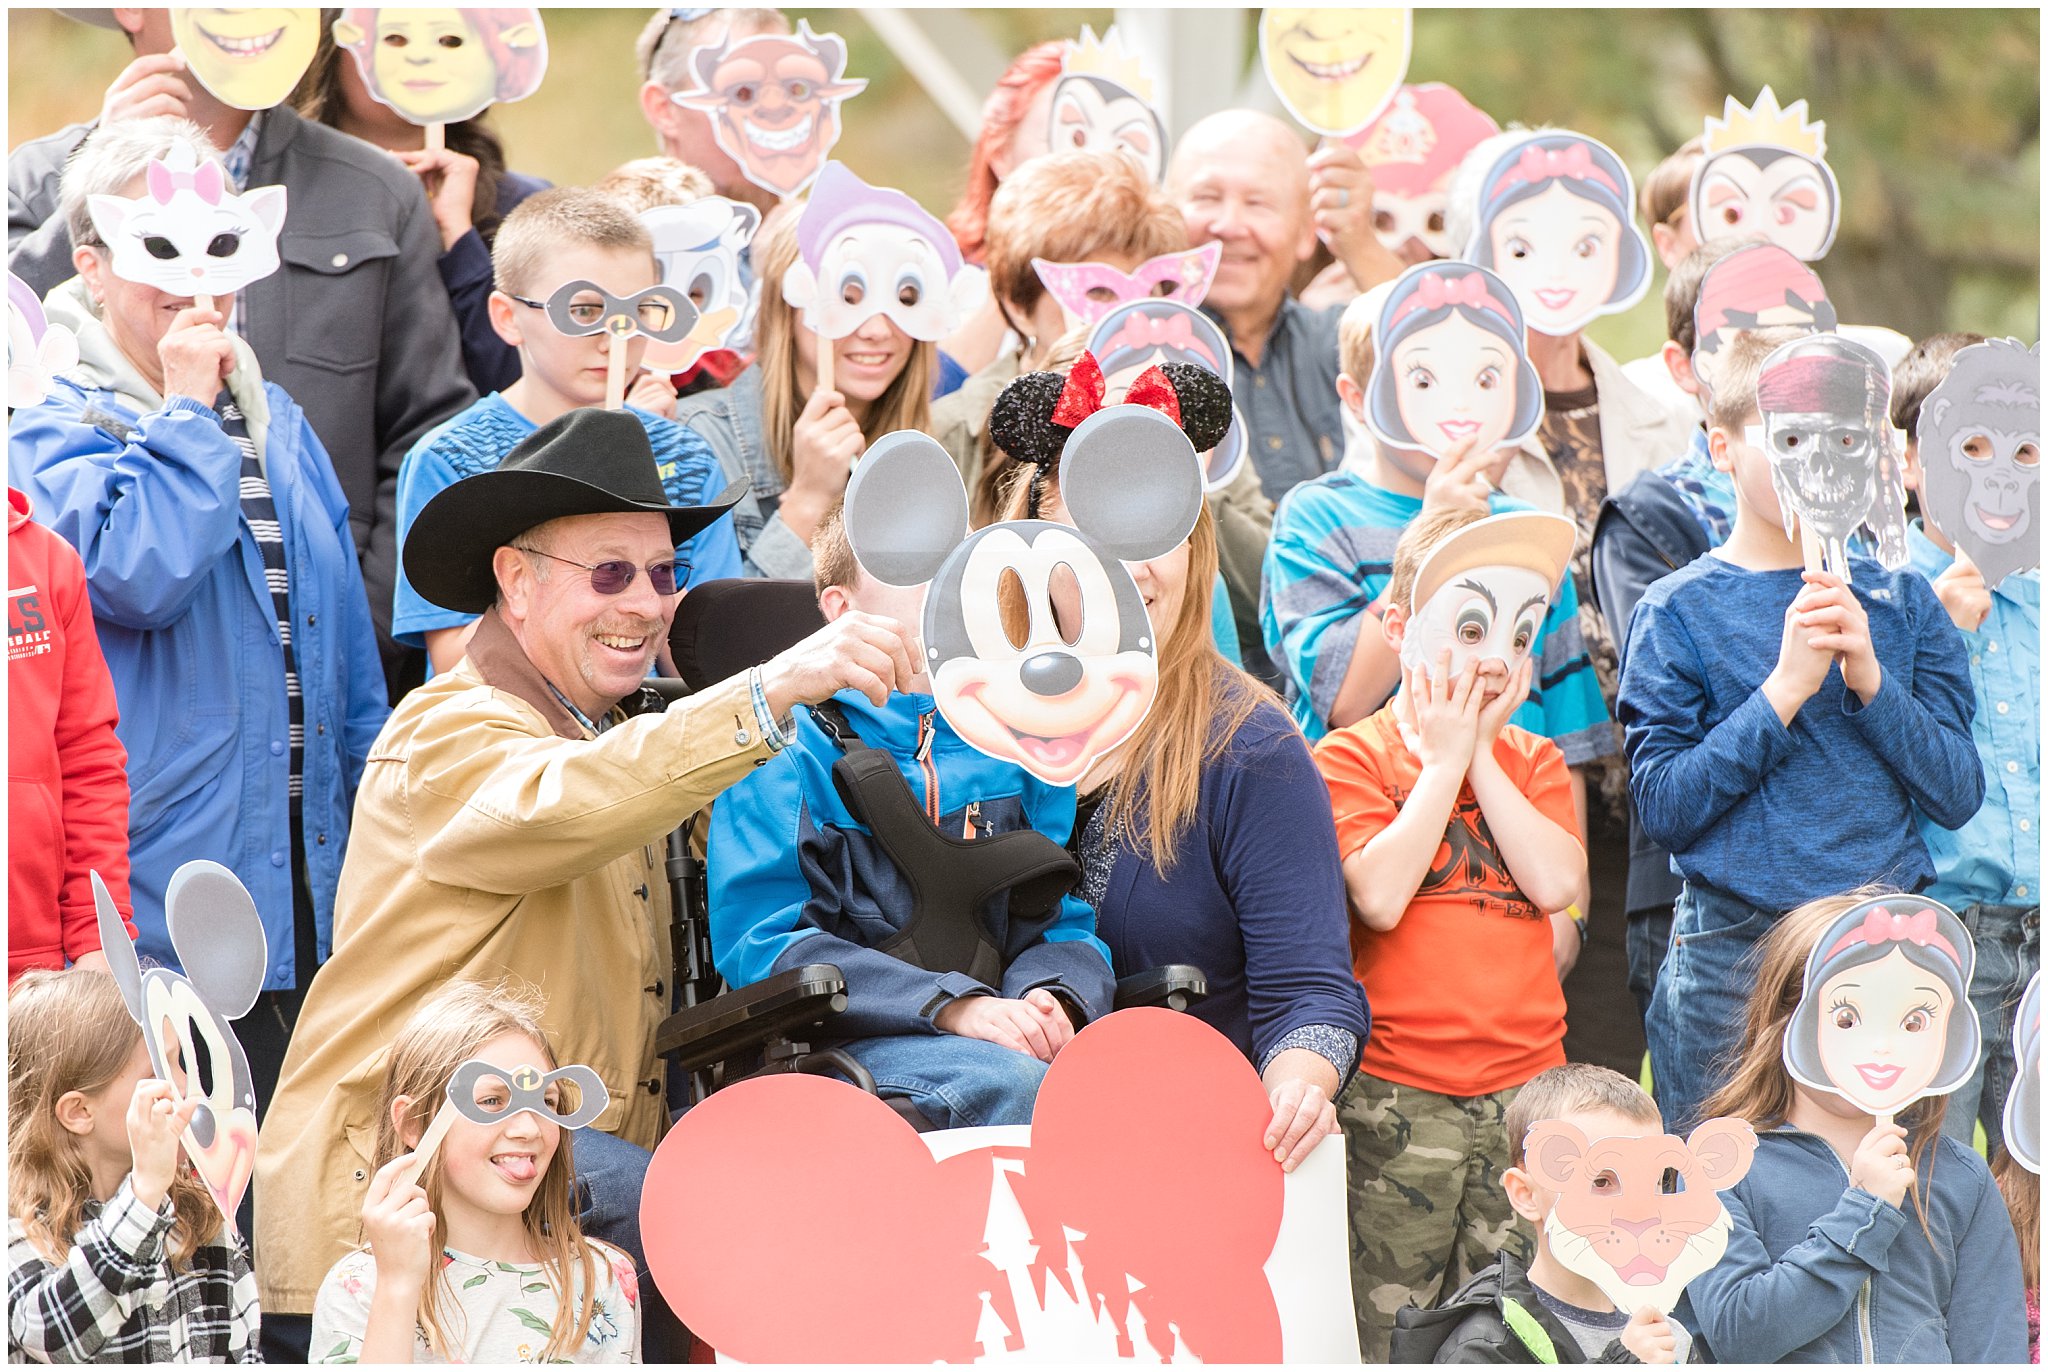 Candid picture of group with masks | Tremonton Family Pictures and Make a Wish Event | Jessie and Dallin Photography